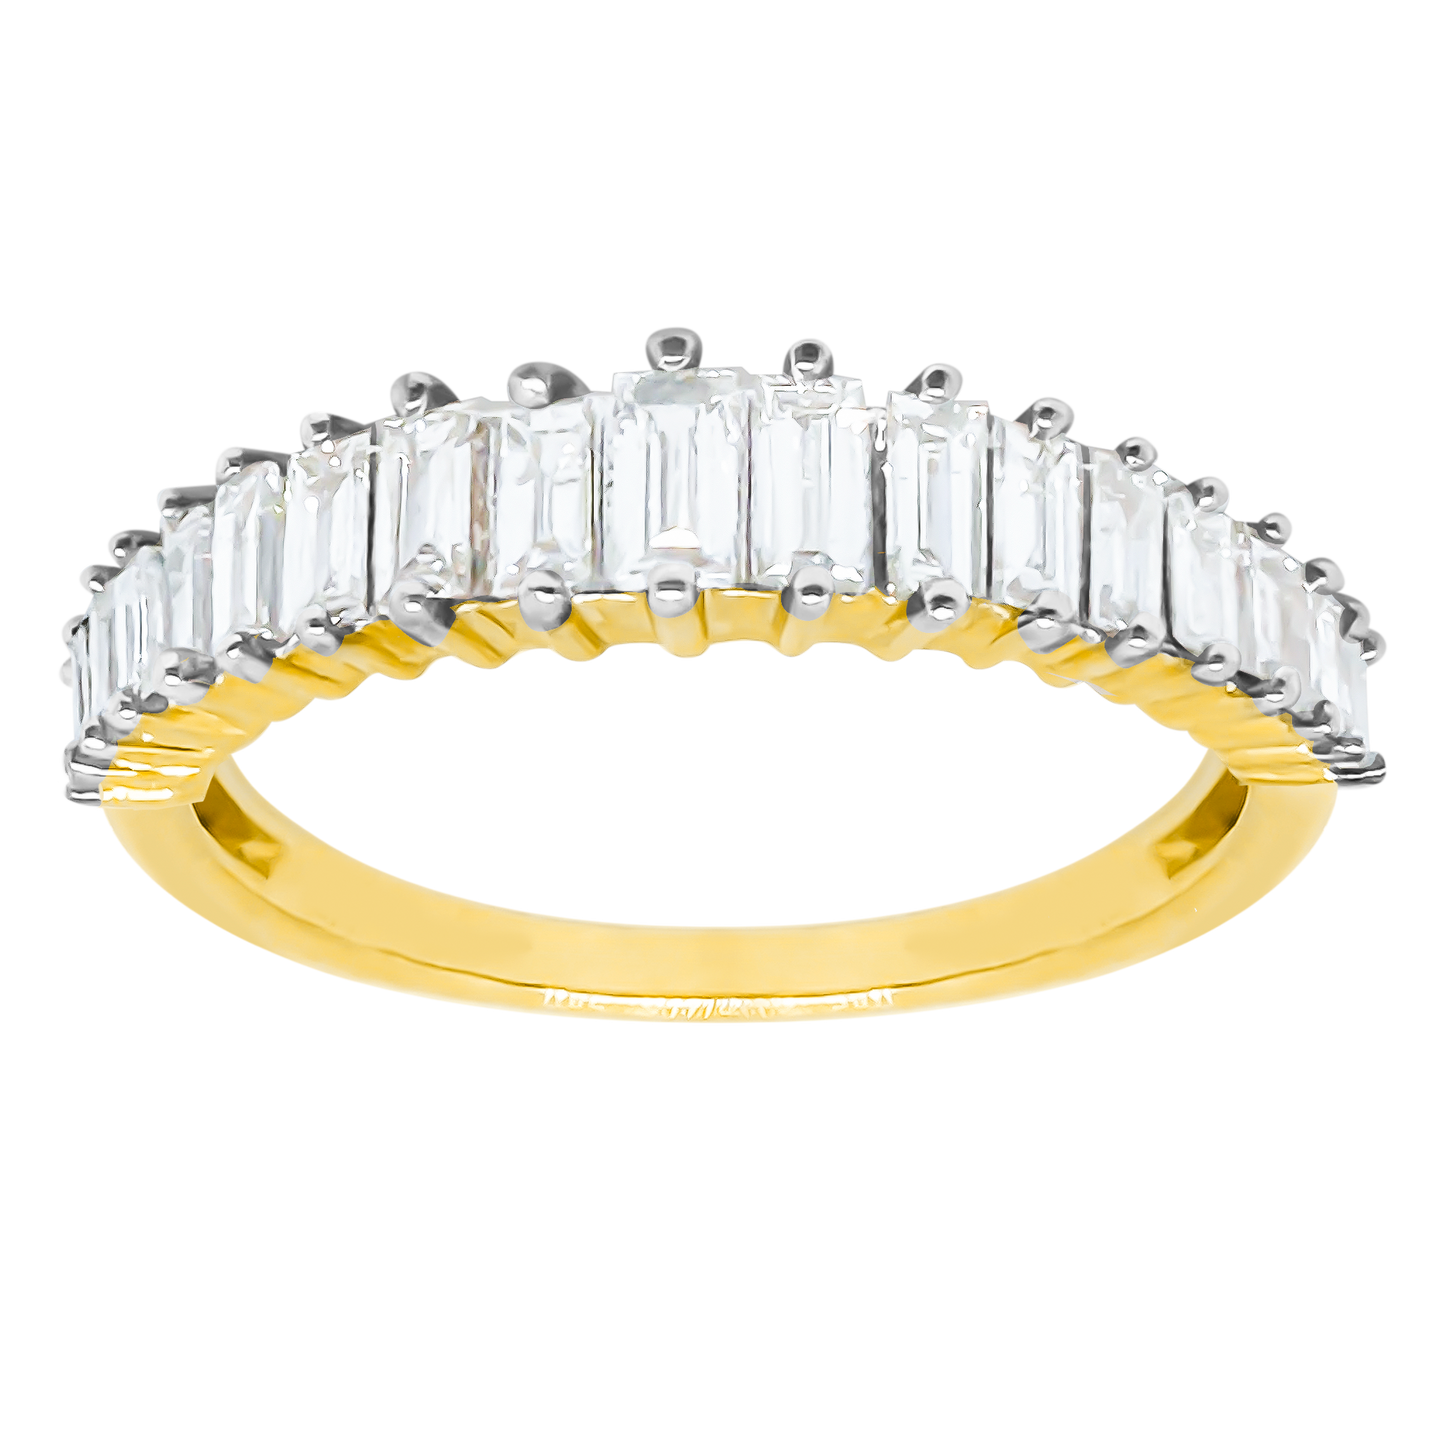 0.75ct Diamond Half Eternity Step Baguette Ring in 9ct Yellow Gold